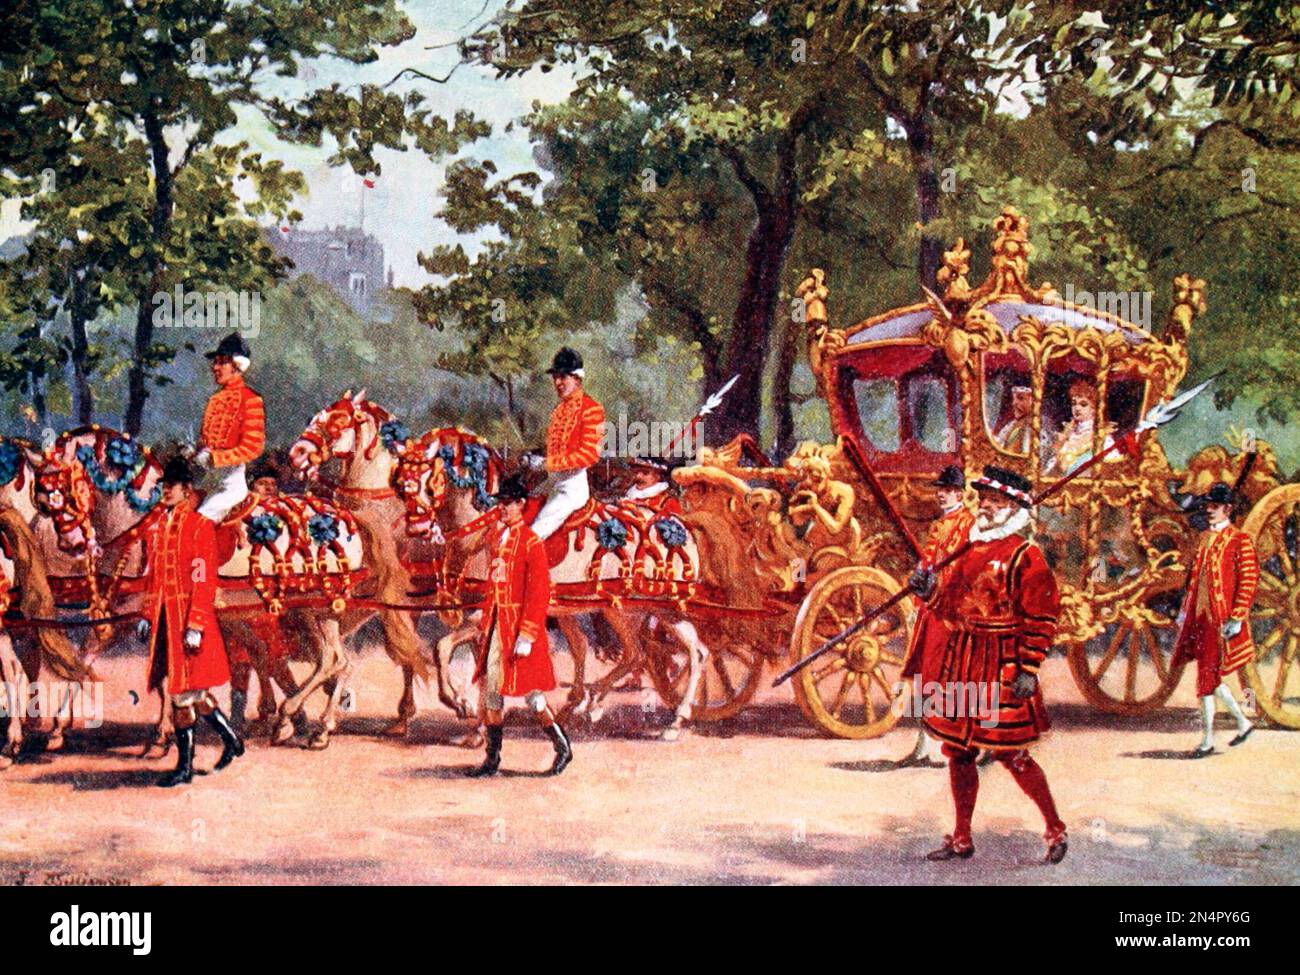 The Coronation Coach - Londres, Angleterre, vers 1900 Banque D'Images